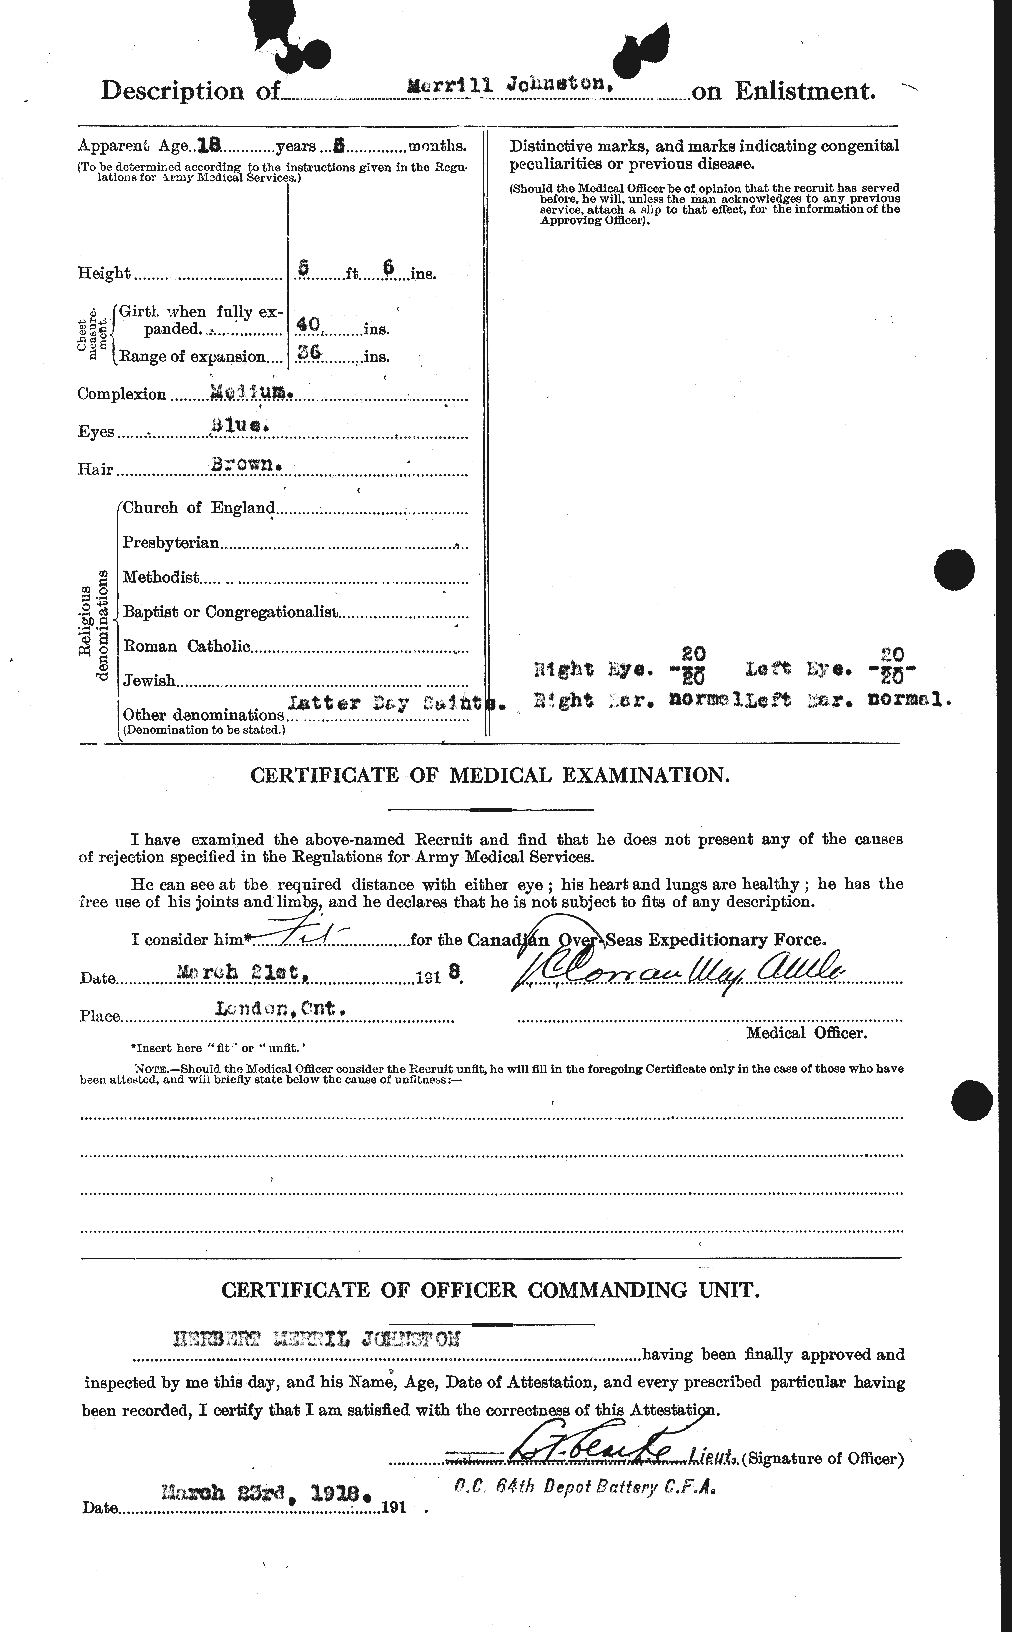 Personnel Records of the First World War - CEF 422658b